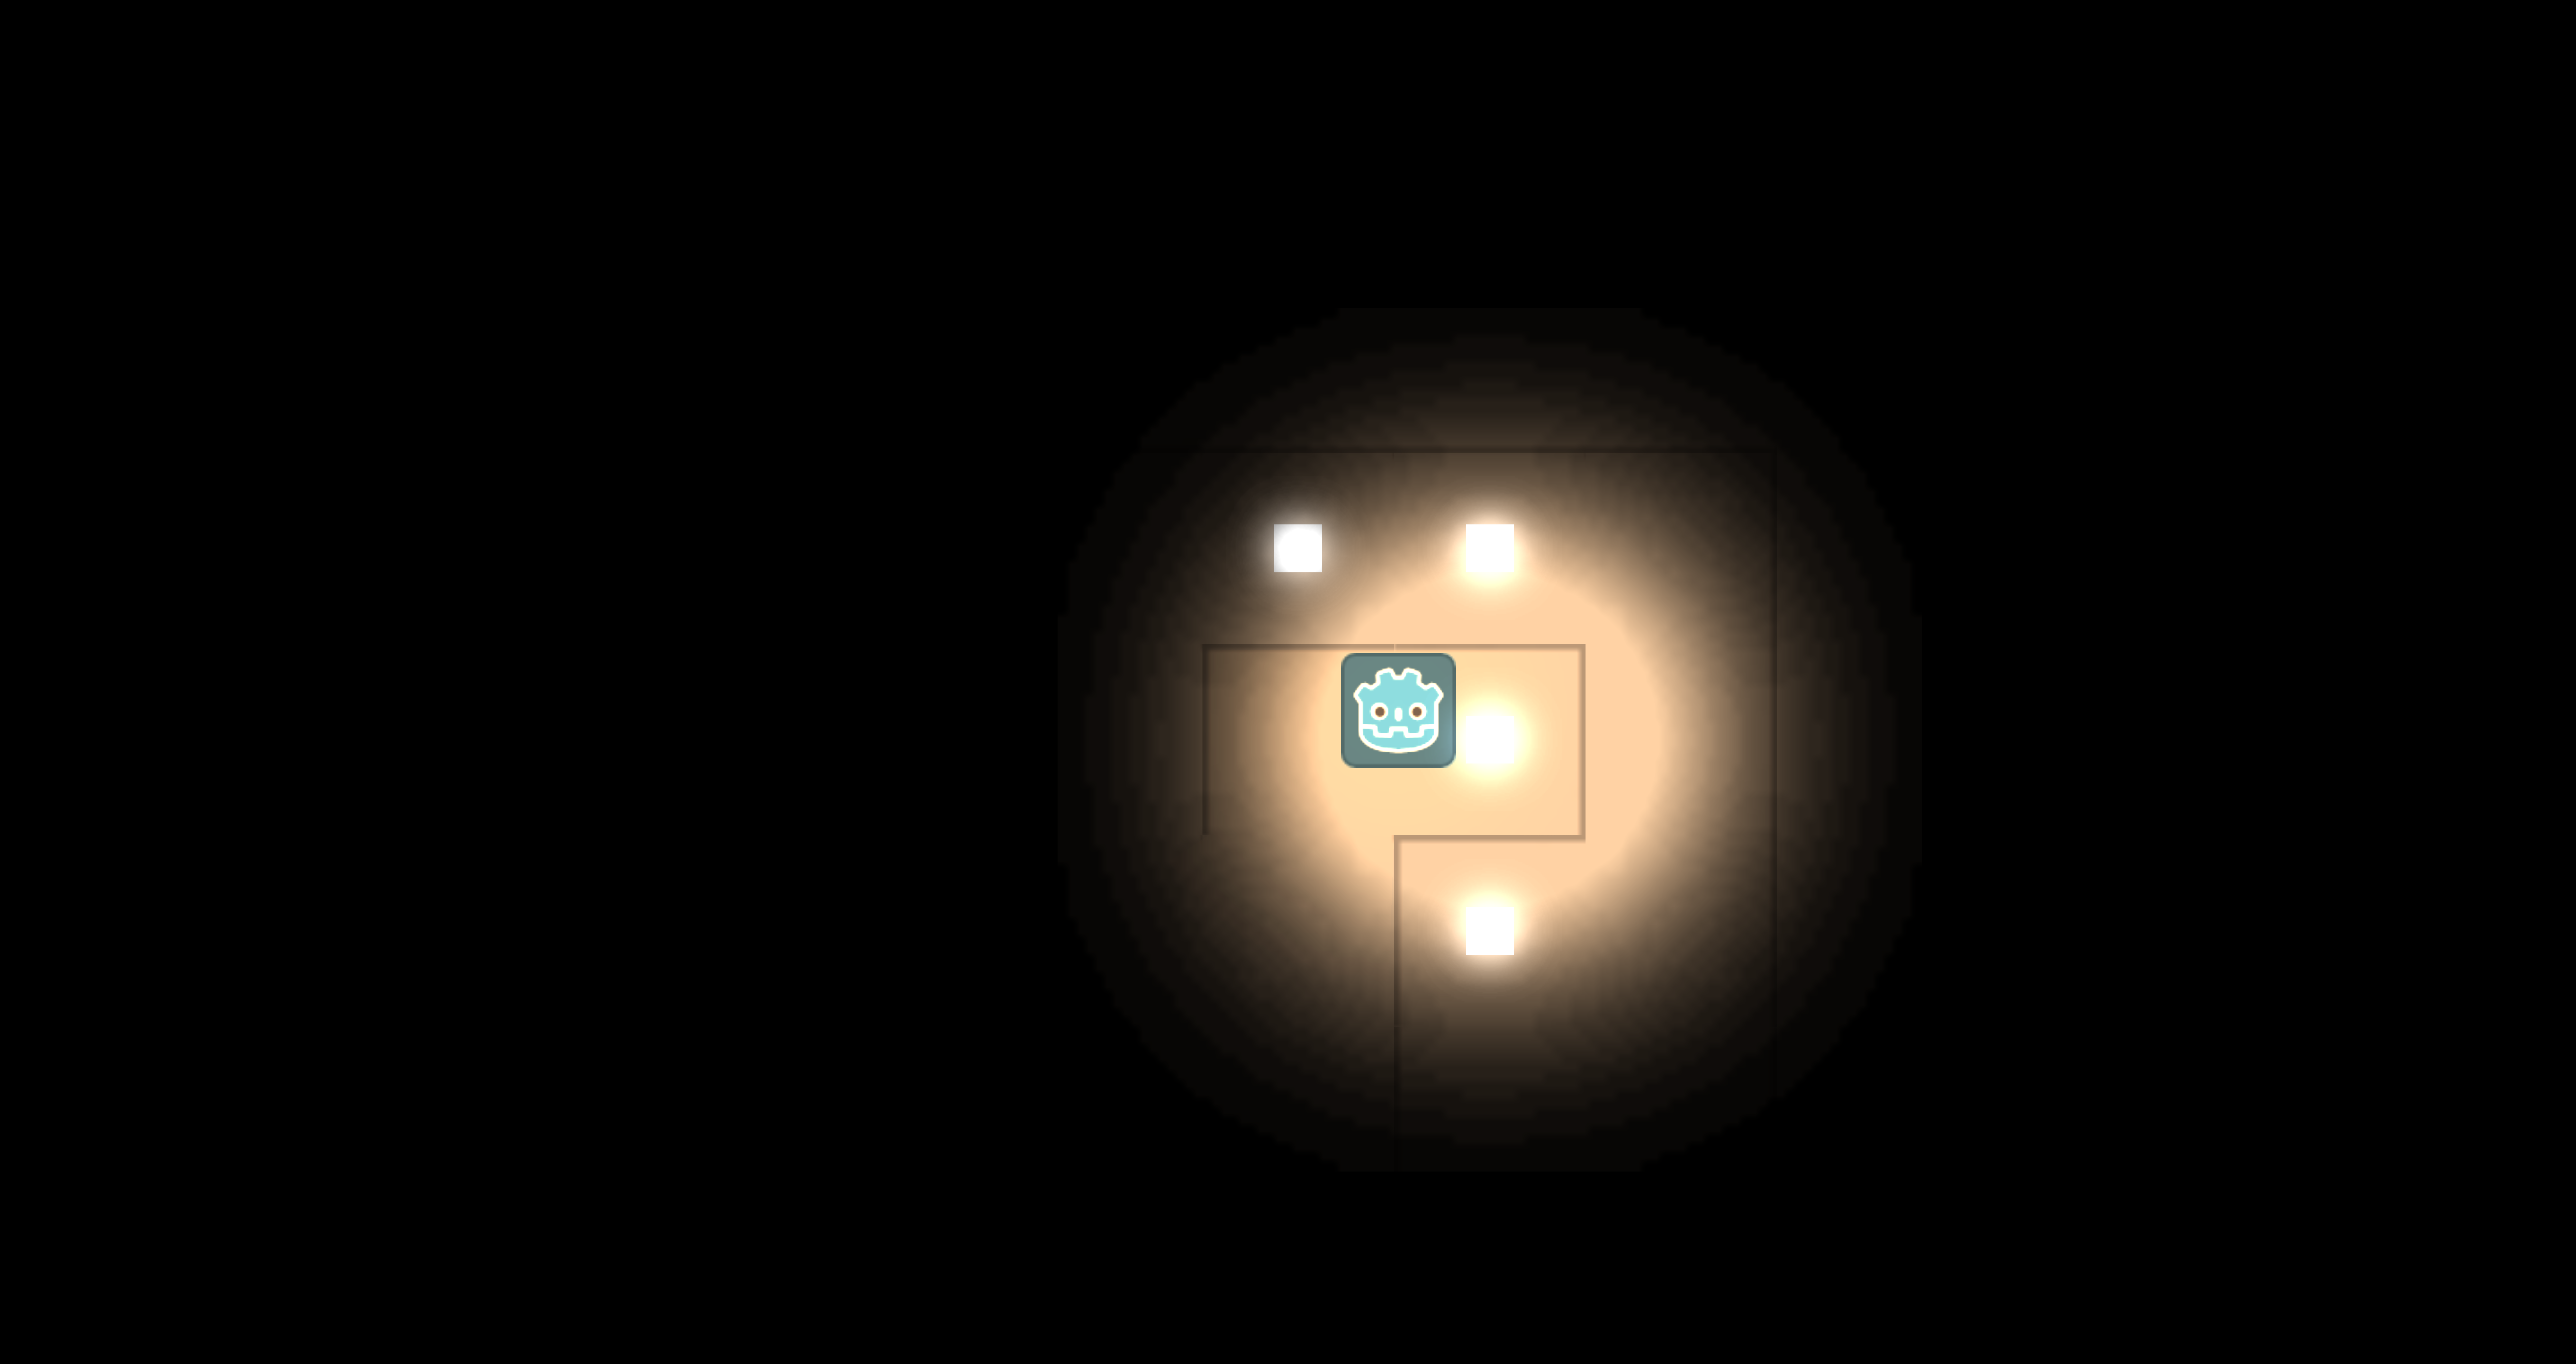 **Figure 1:** A picture showing an illuminated circle from the labyrinth in the project ‘Hear the Exit’.